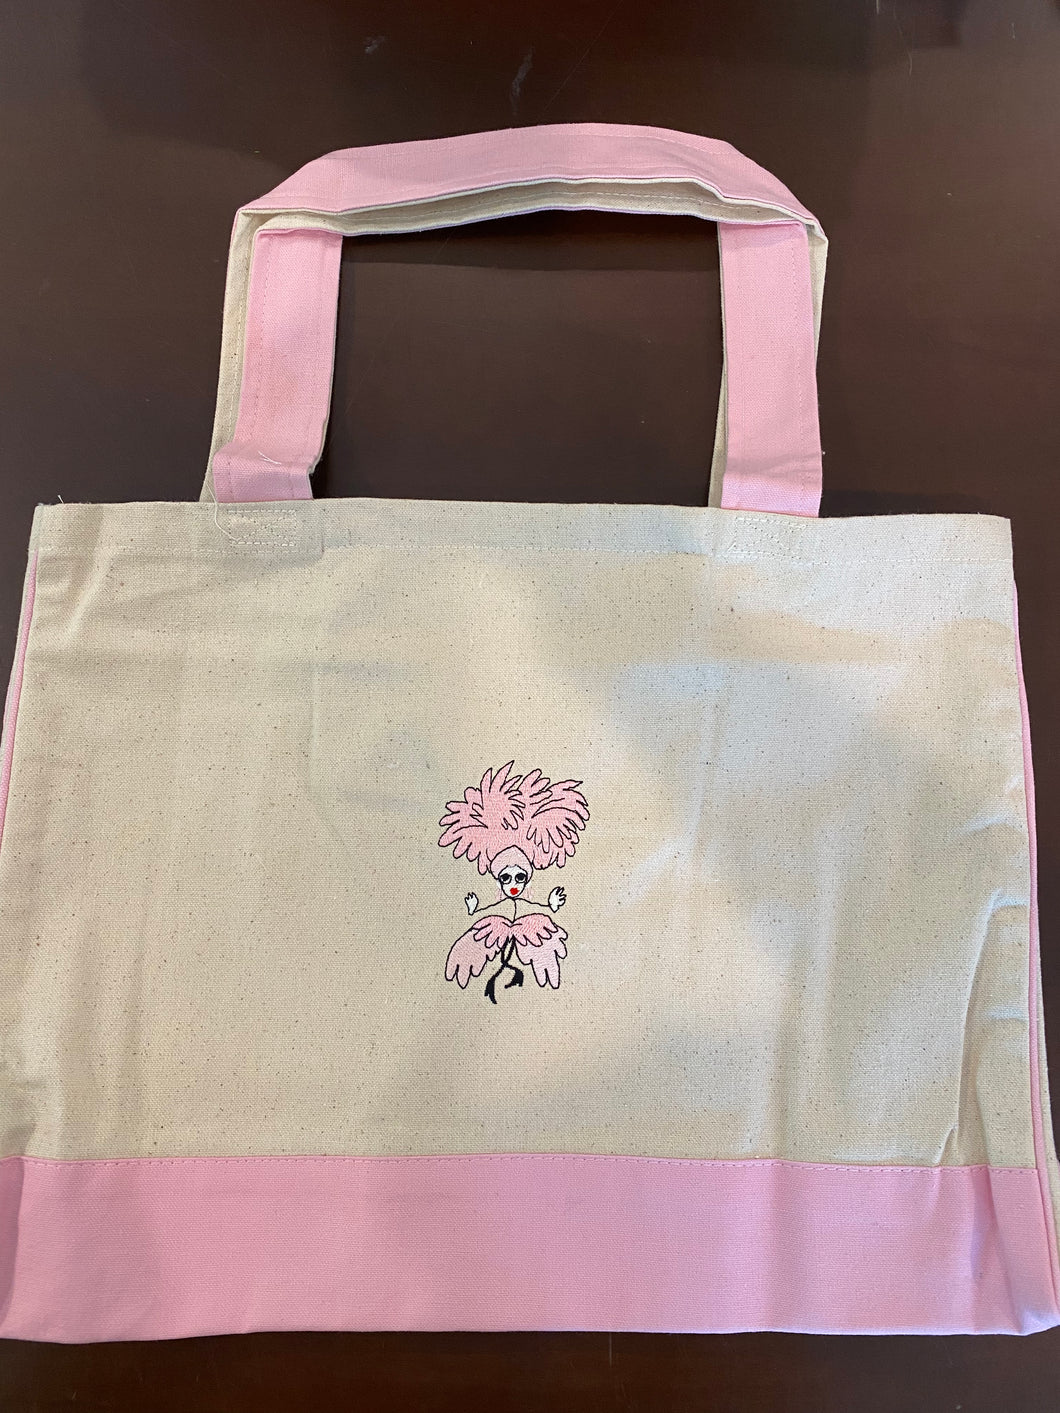 Show Girl Tote Bag - Embroidered